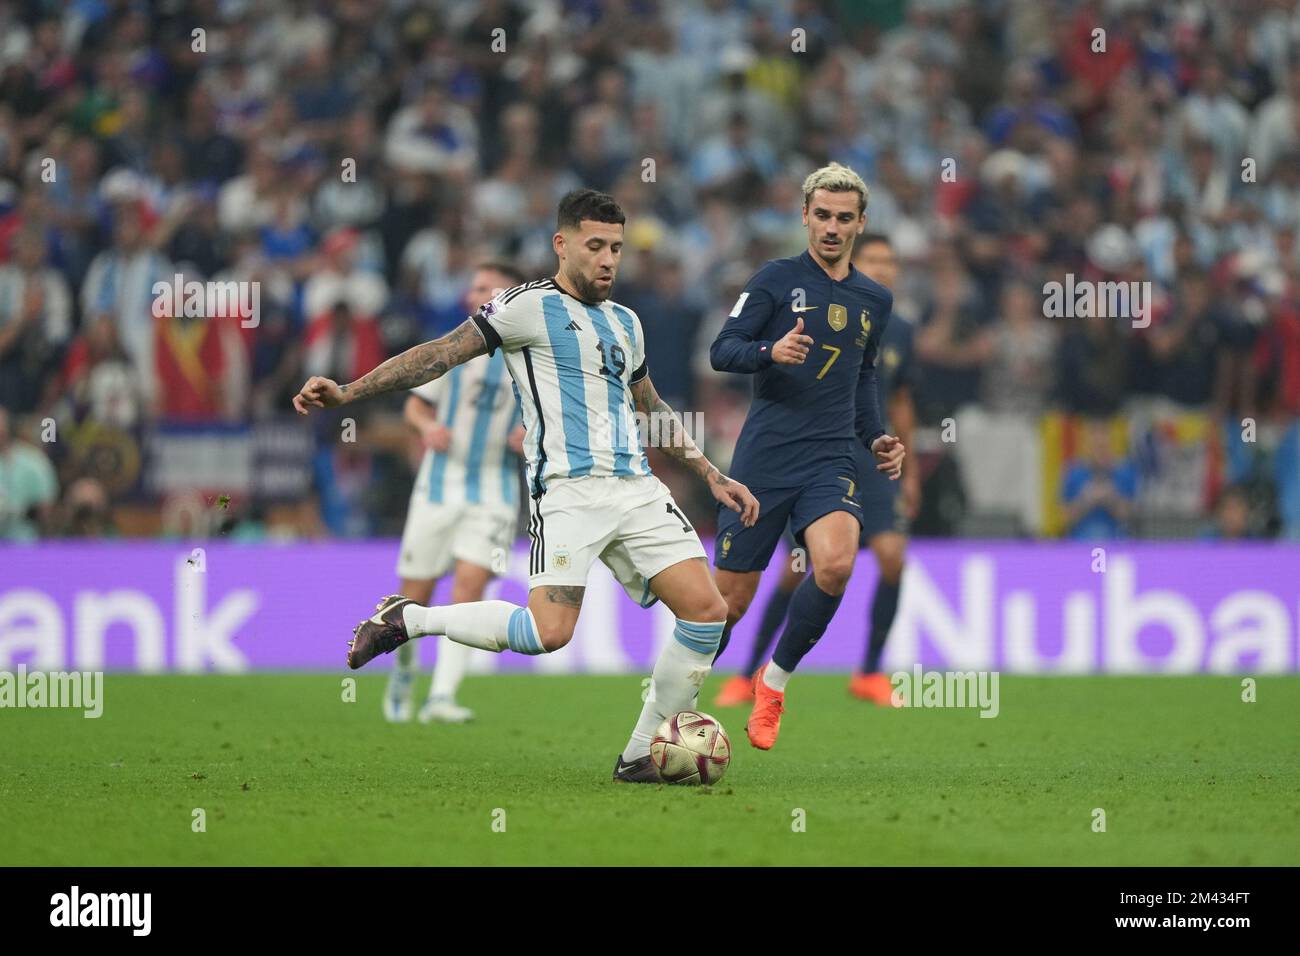 LUSAIL, QATAR - DECEMBER 18: Player of Argentina Cristian Romero controls the ball during the FIFA World Cup Qatar 2022 Final match between Argentina and France at Lusail Stadium on December 18, 2022 in Lusail, Qatar. (Photo by Florencia Tan Jun/PxImages) Stock Photo